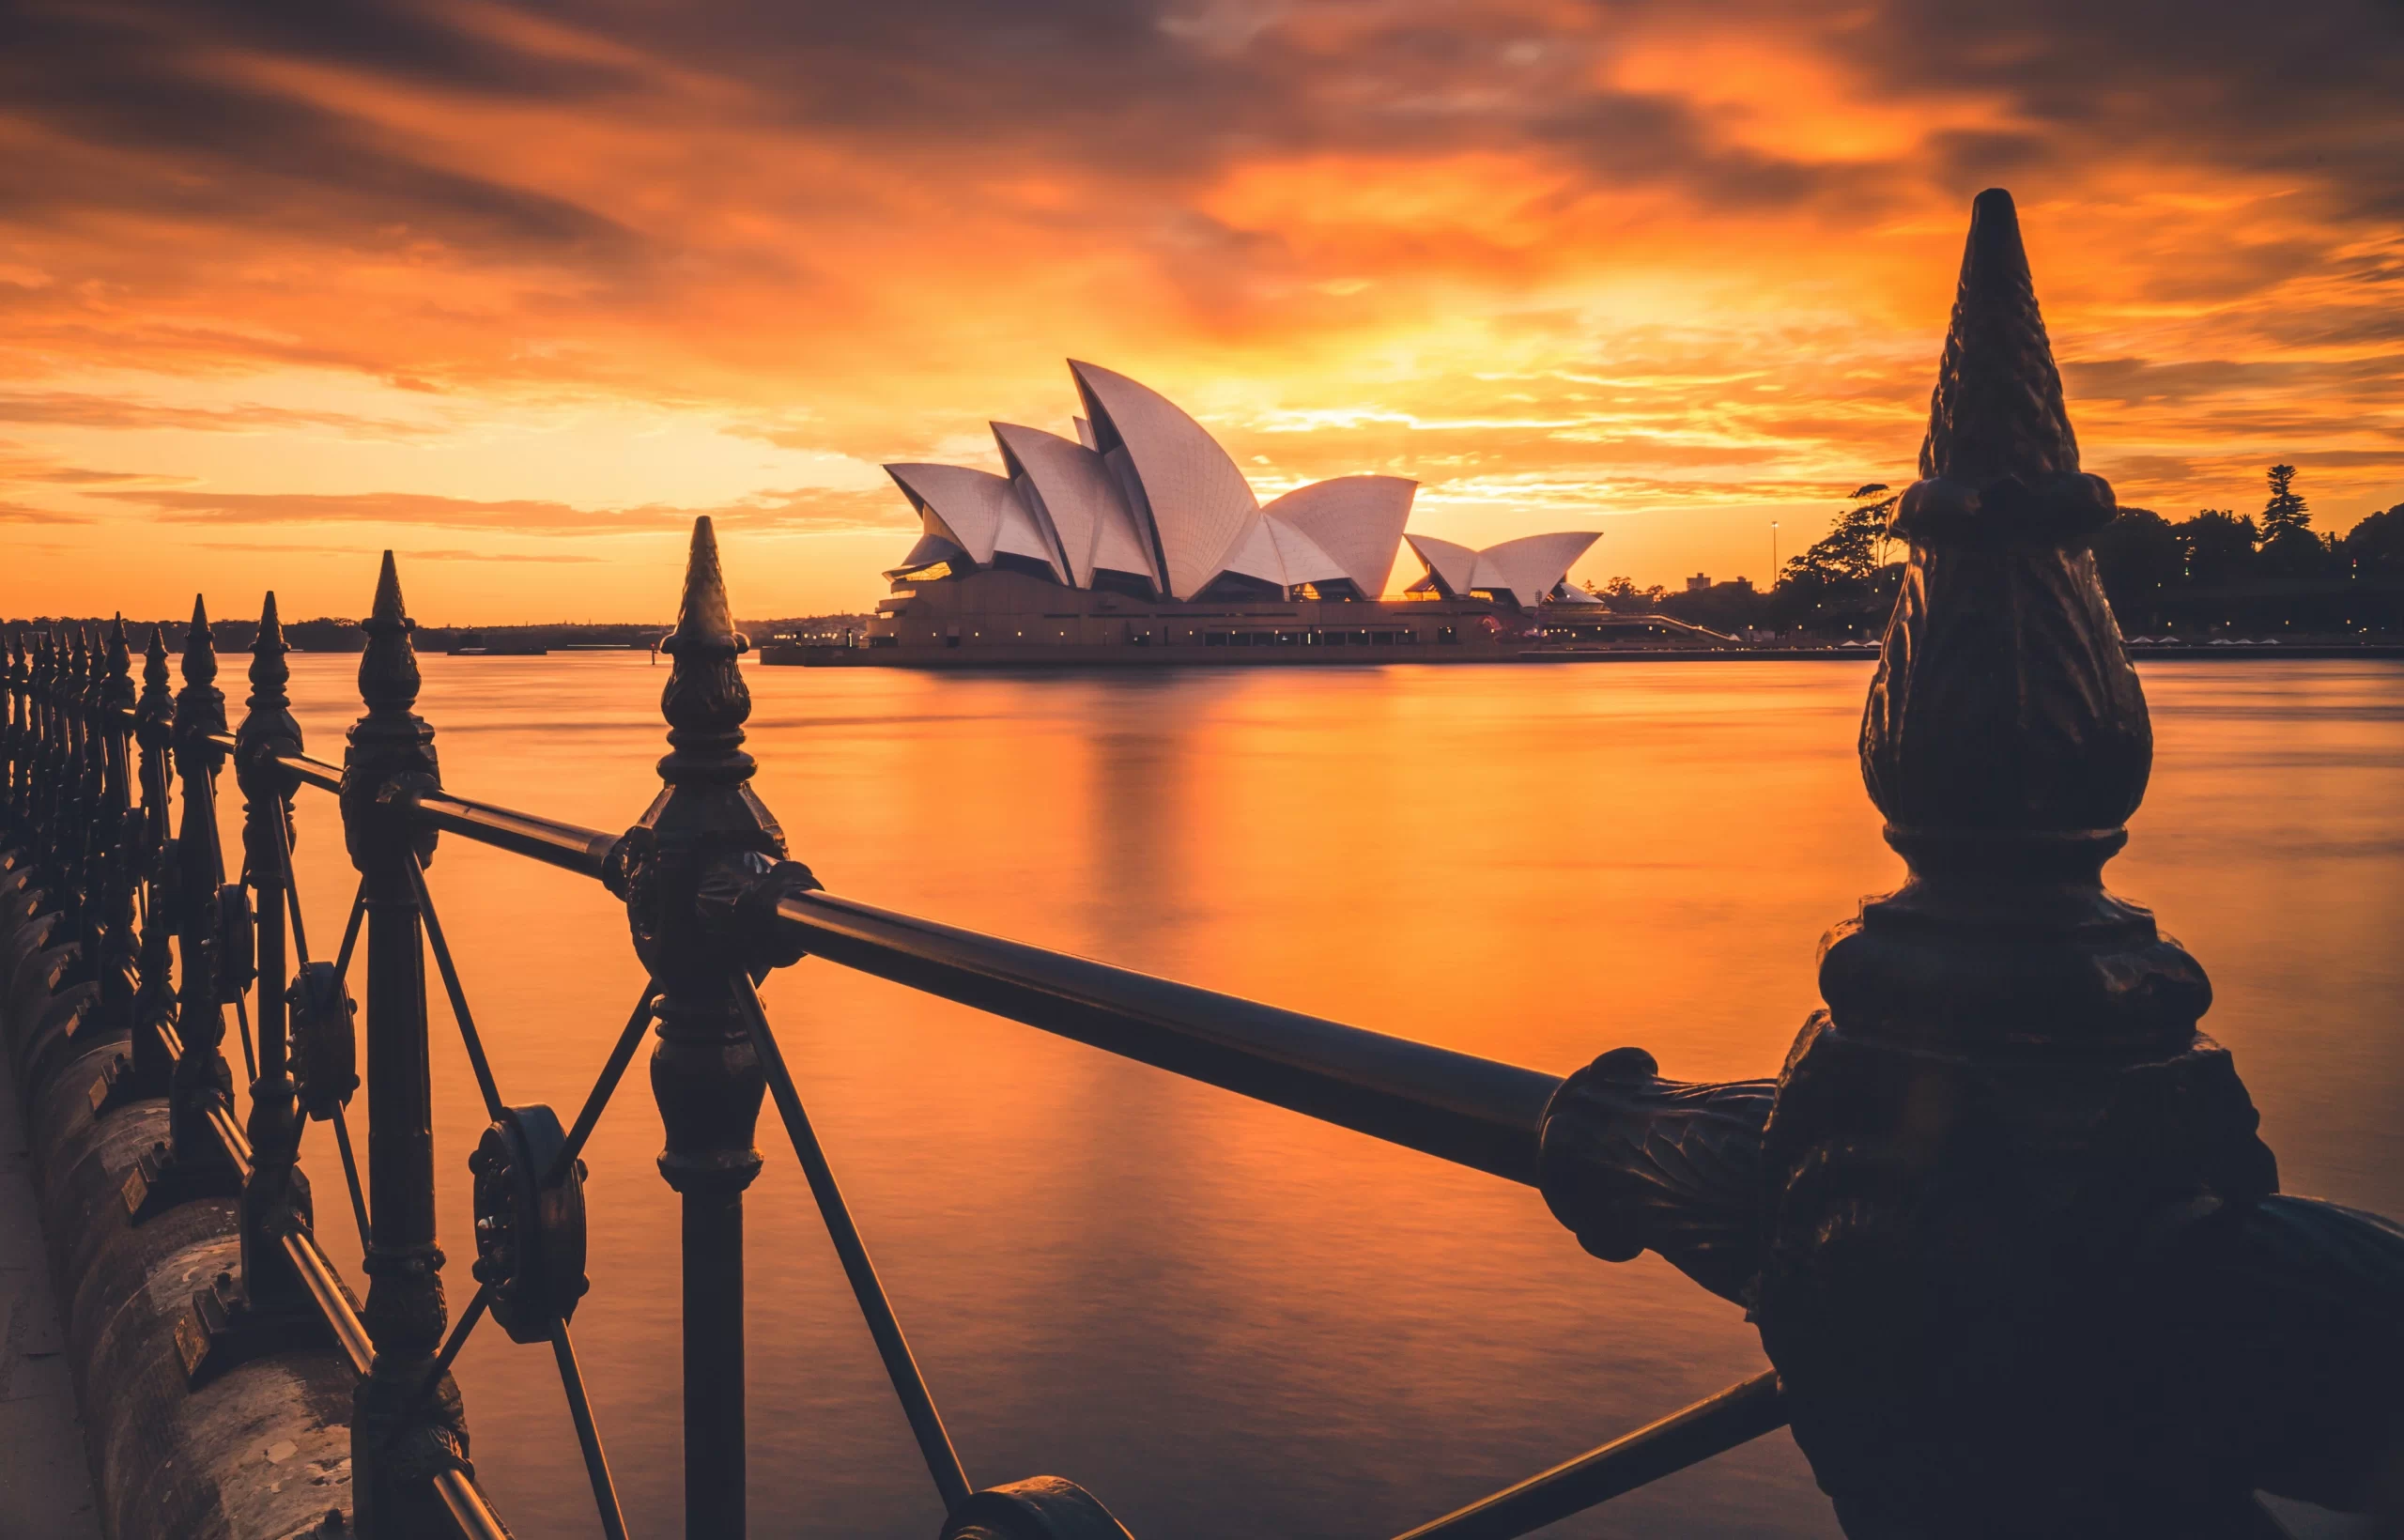 Circular Quay, Sydney, Australia Published on April 28, 2017 Canon, EOS 5D Mark III Free to use under the Unsplash License A stunning sunrise, captured behind the famous Sydney Opera House. Image taken at Circular Quay, Sydney, Australia.